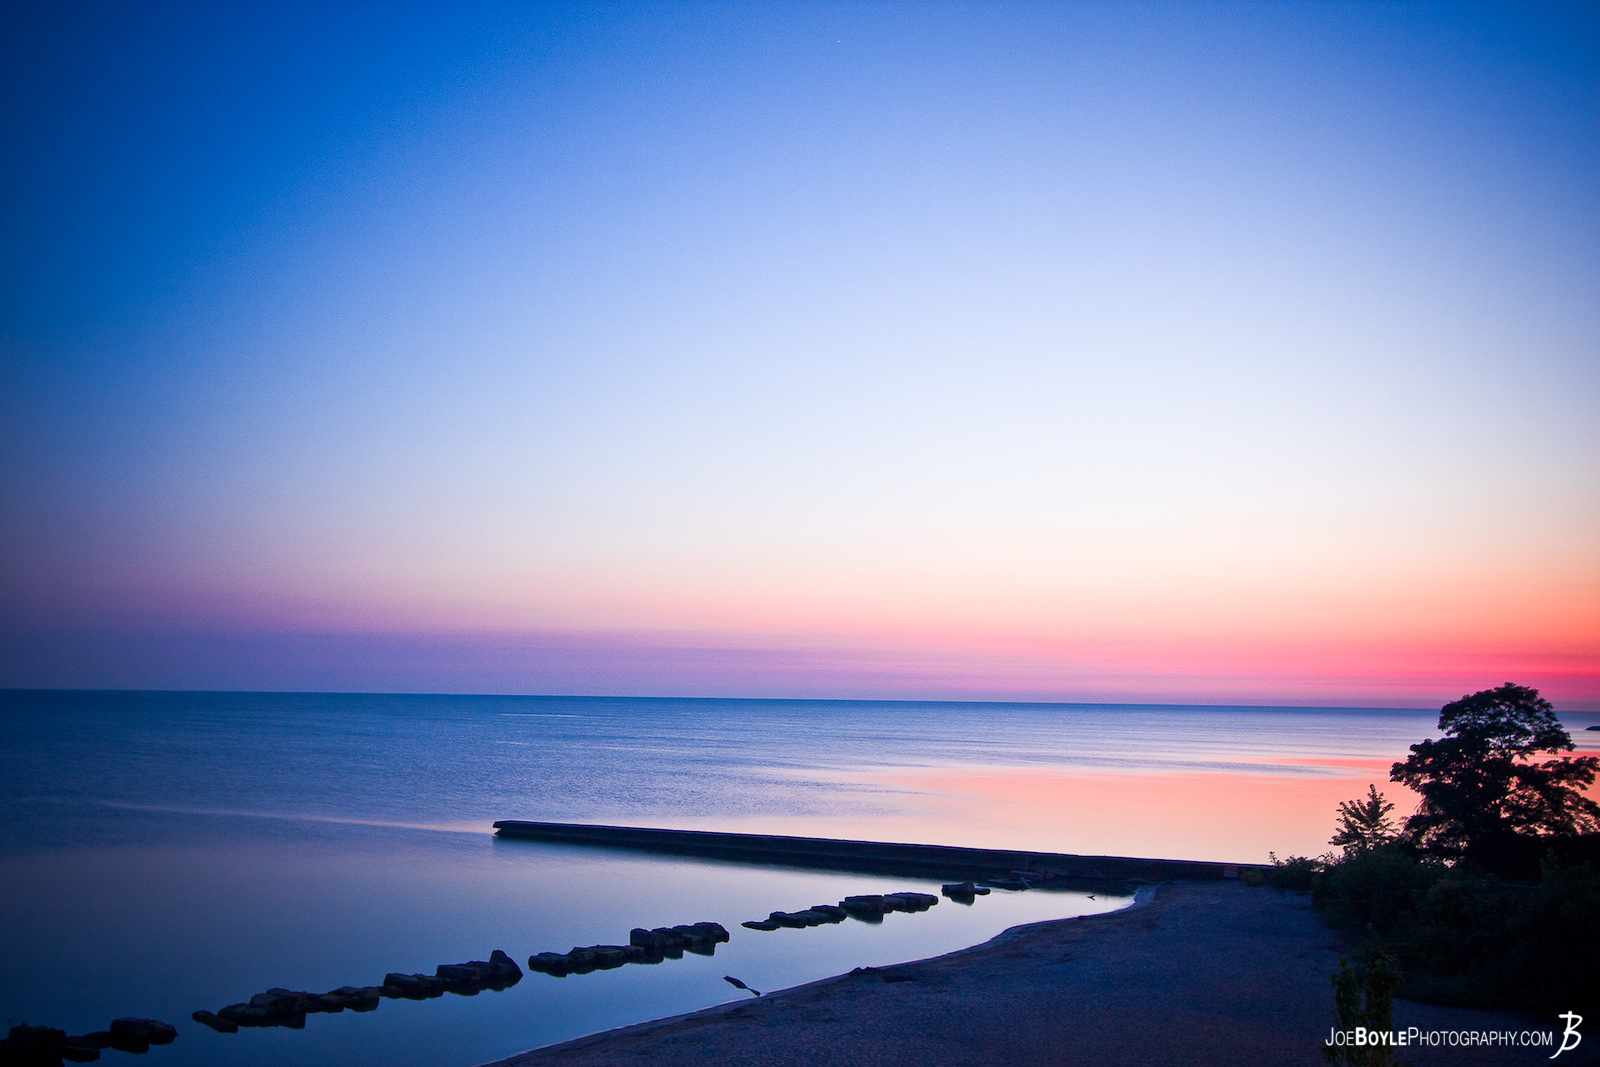  This image of the Lake Erie Coast was taken in the early morning hours at Rocky River Park located near Cleveland, Ohio. It happened that one particular night I couldn't sleep very well so I called it quits & started my day earlier than I planned. The thought then came into my mind to go down to the park and see if I can get some cool shots. What else is there to do for a photographer who is up before sunrise? It was a perfect morning to try such an experiment! 